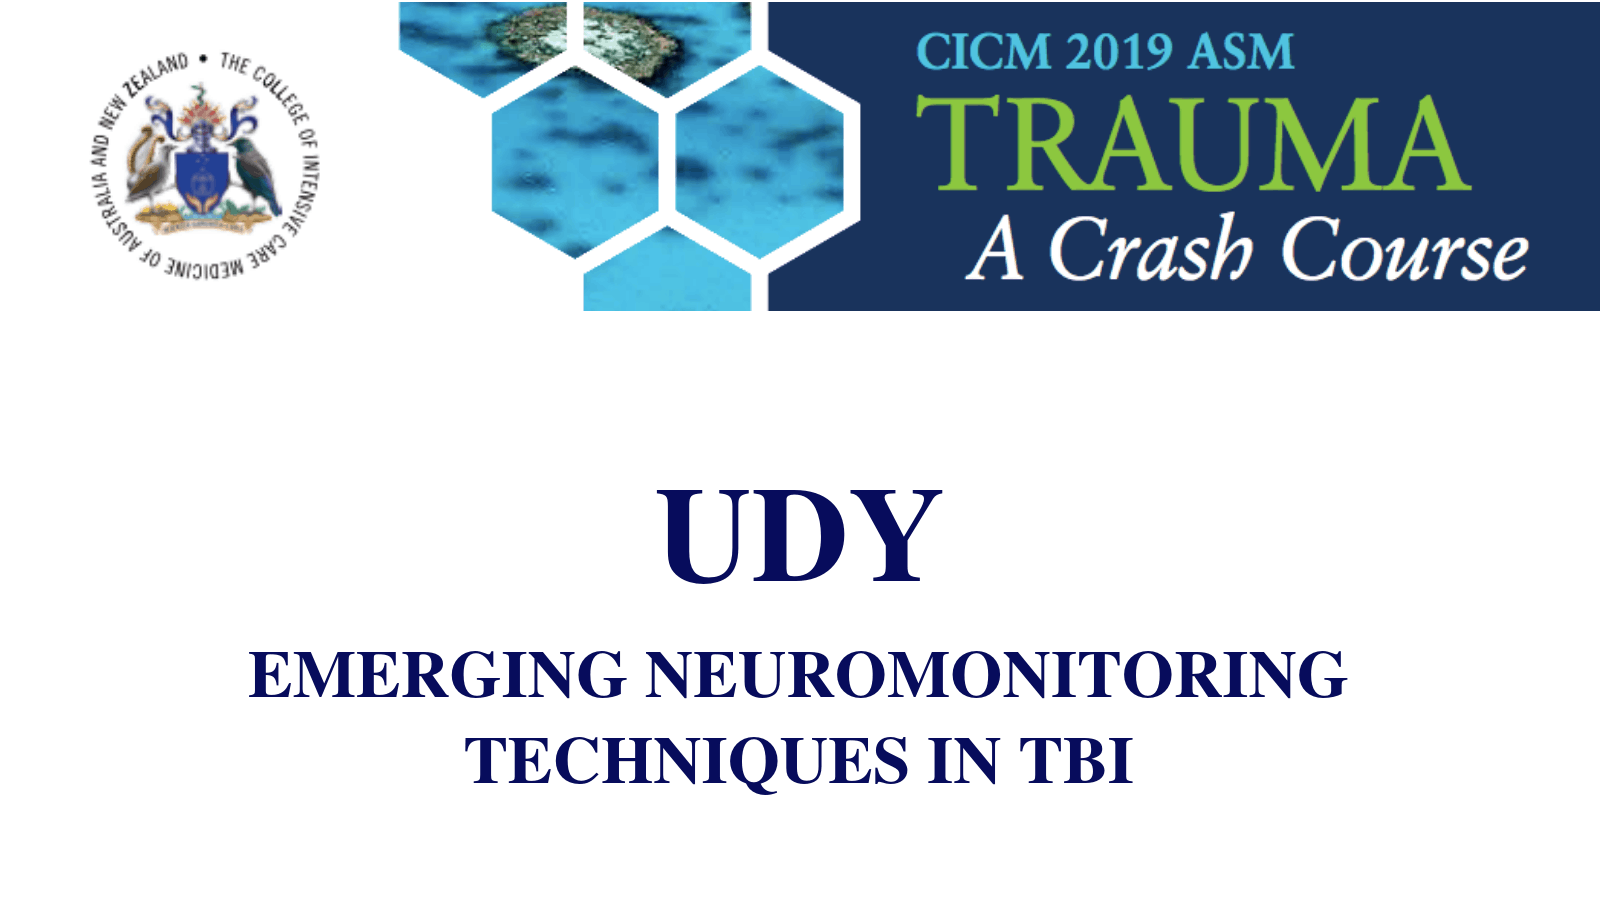 Emerging neuromonitoring techniques in TBI